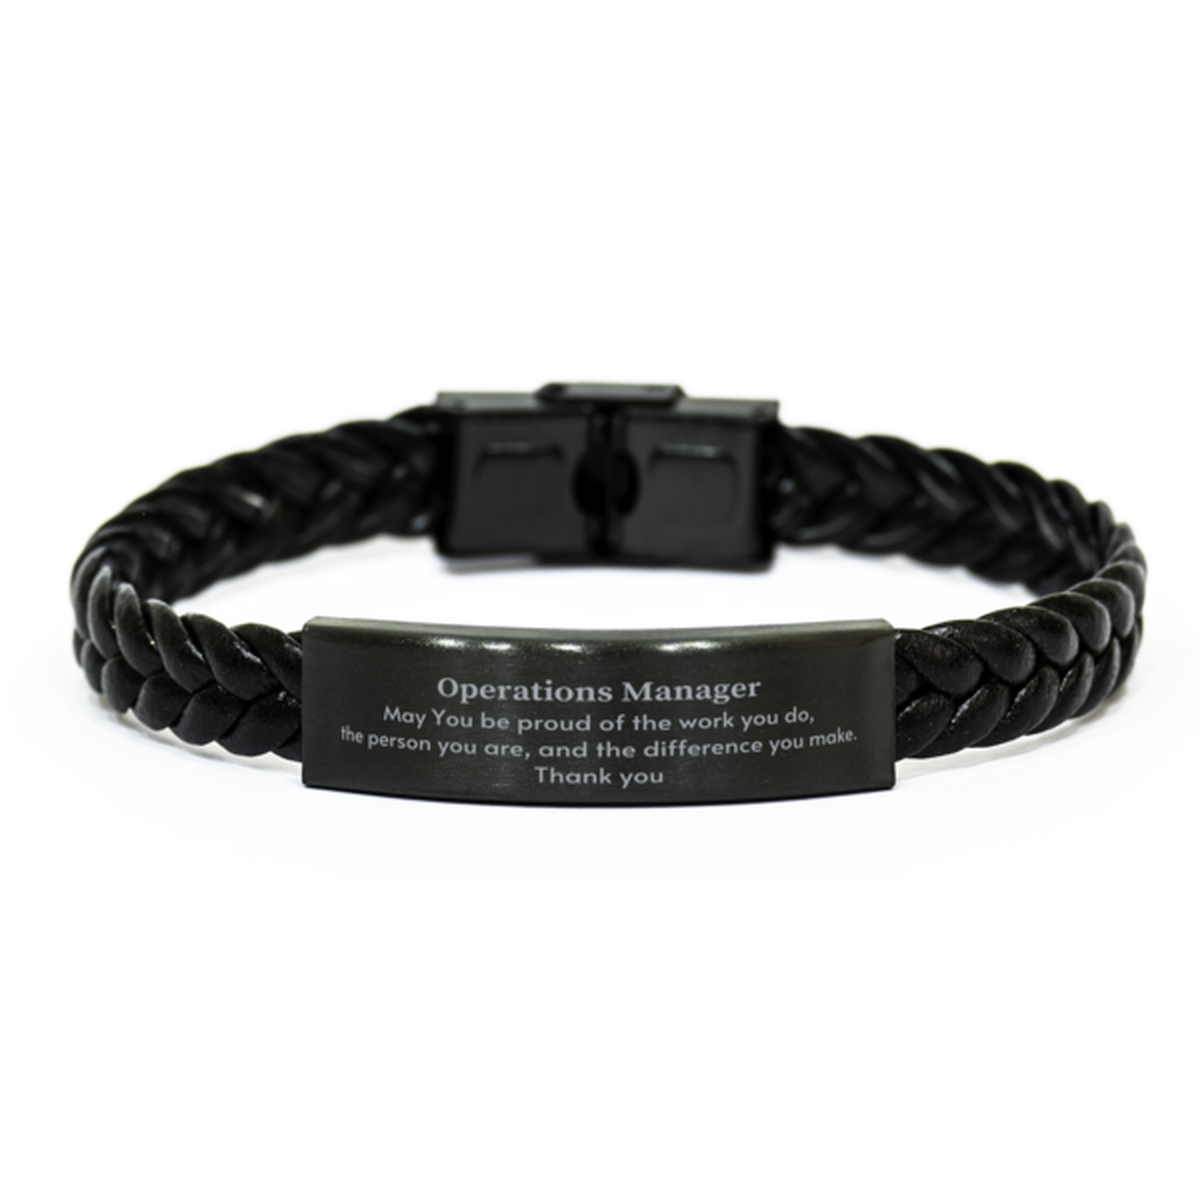 Heartwarming Braided Leather Bracelet Retirement Coworkers Gifts for Operations Manager, Operations Manager May You be proud of the work you do, the person you are Gifts for Boss Men Women Friends